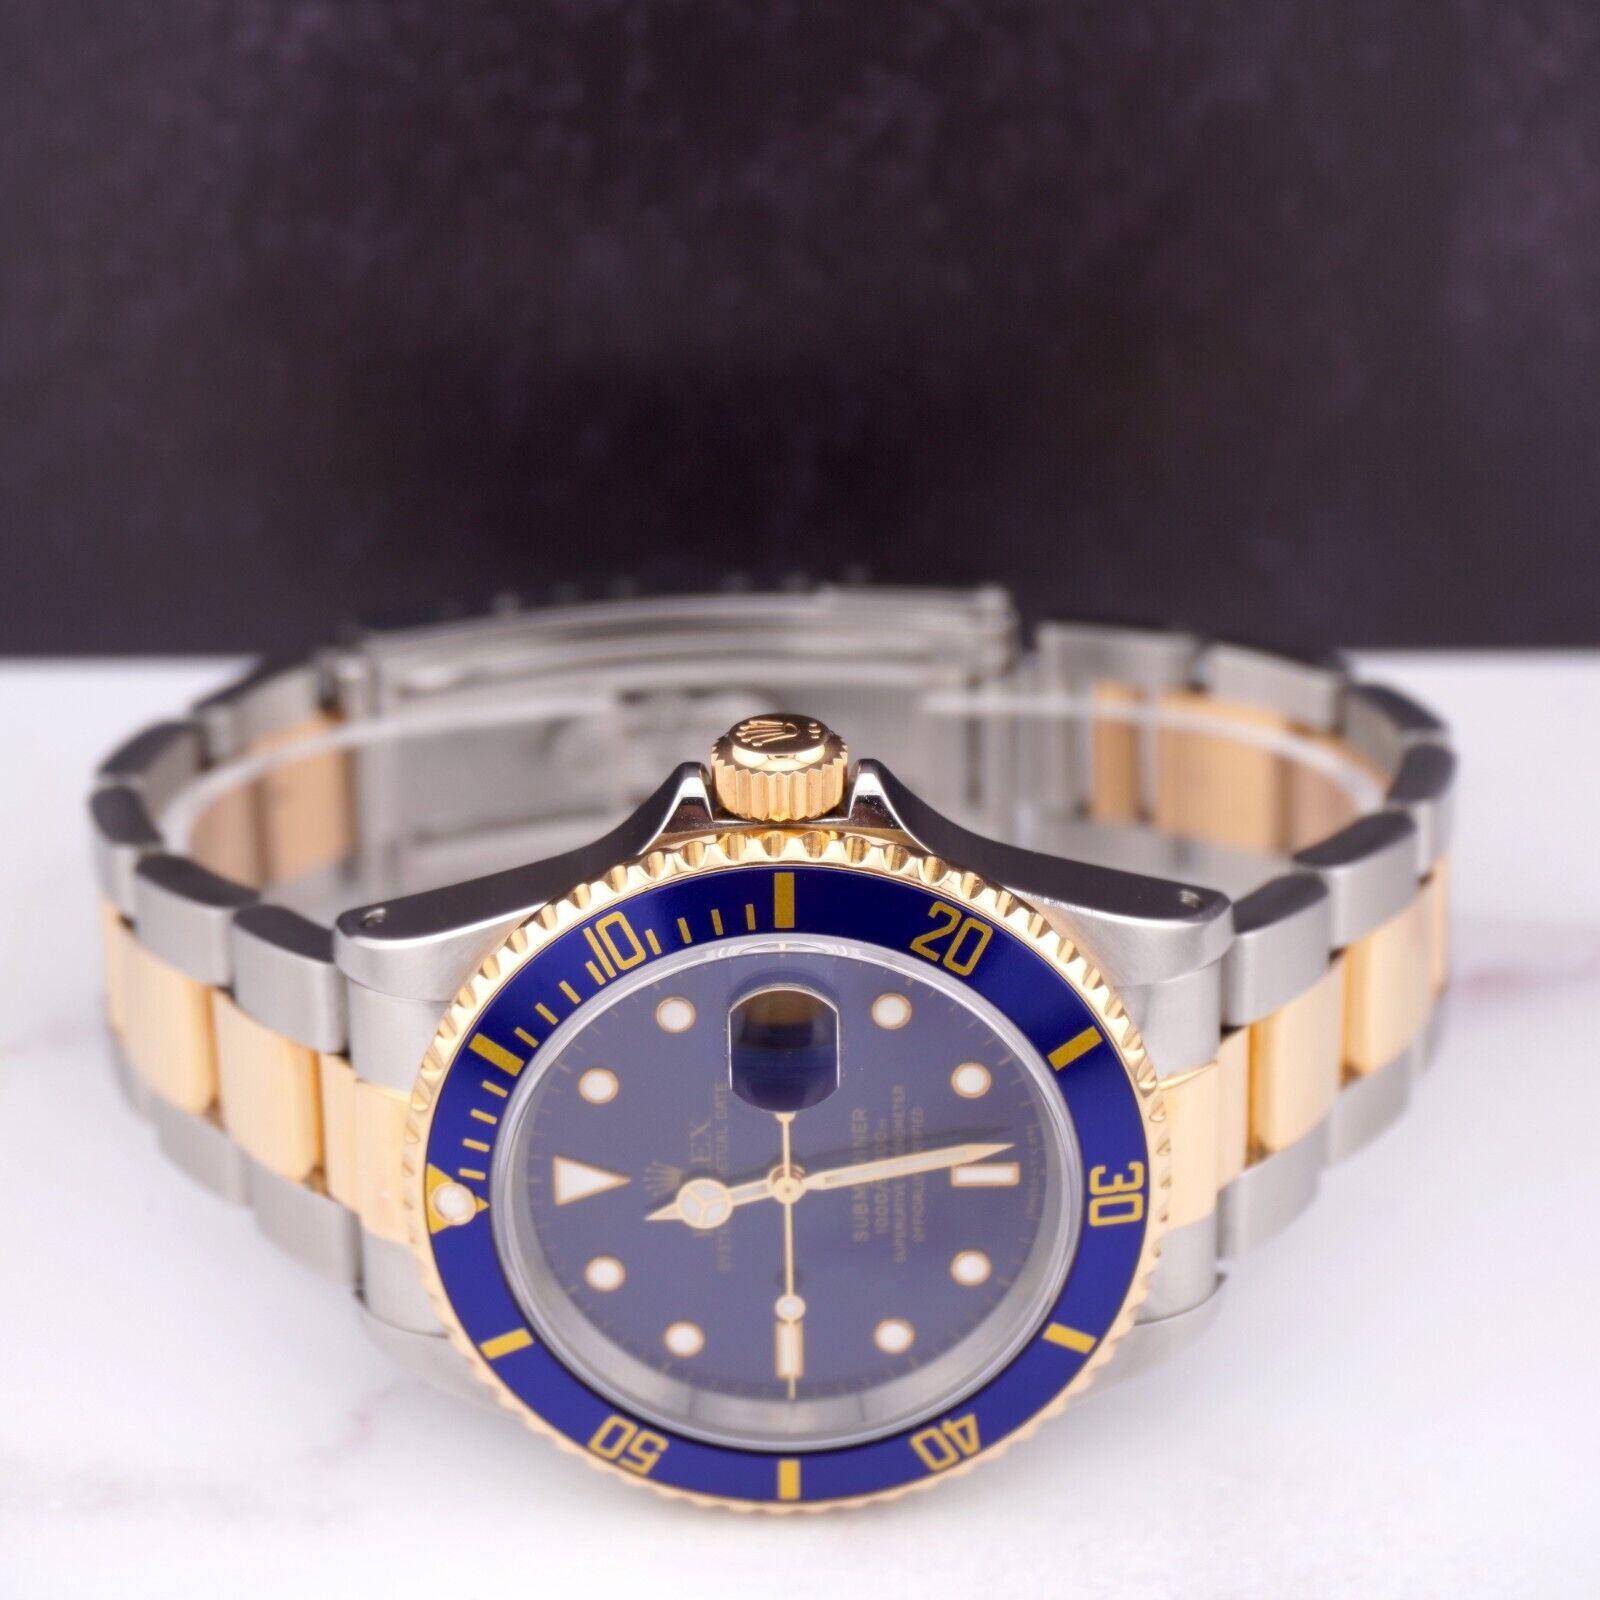 Rolex Submariner Date 40mm 18k Yellow Gold & Steel BLUE Dial Oyster Watch 16613 In Good Condition For Sale In Pleasanton, CA